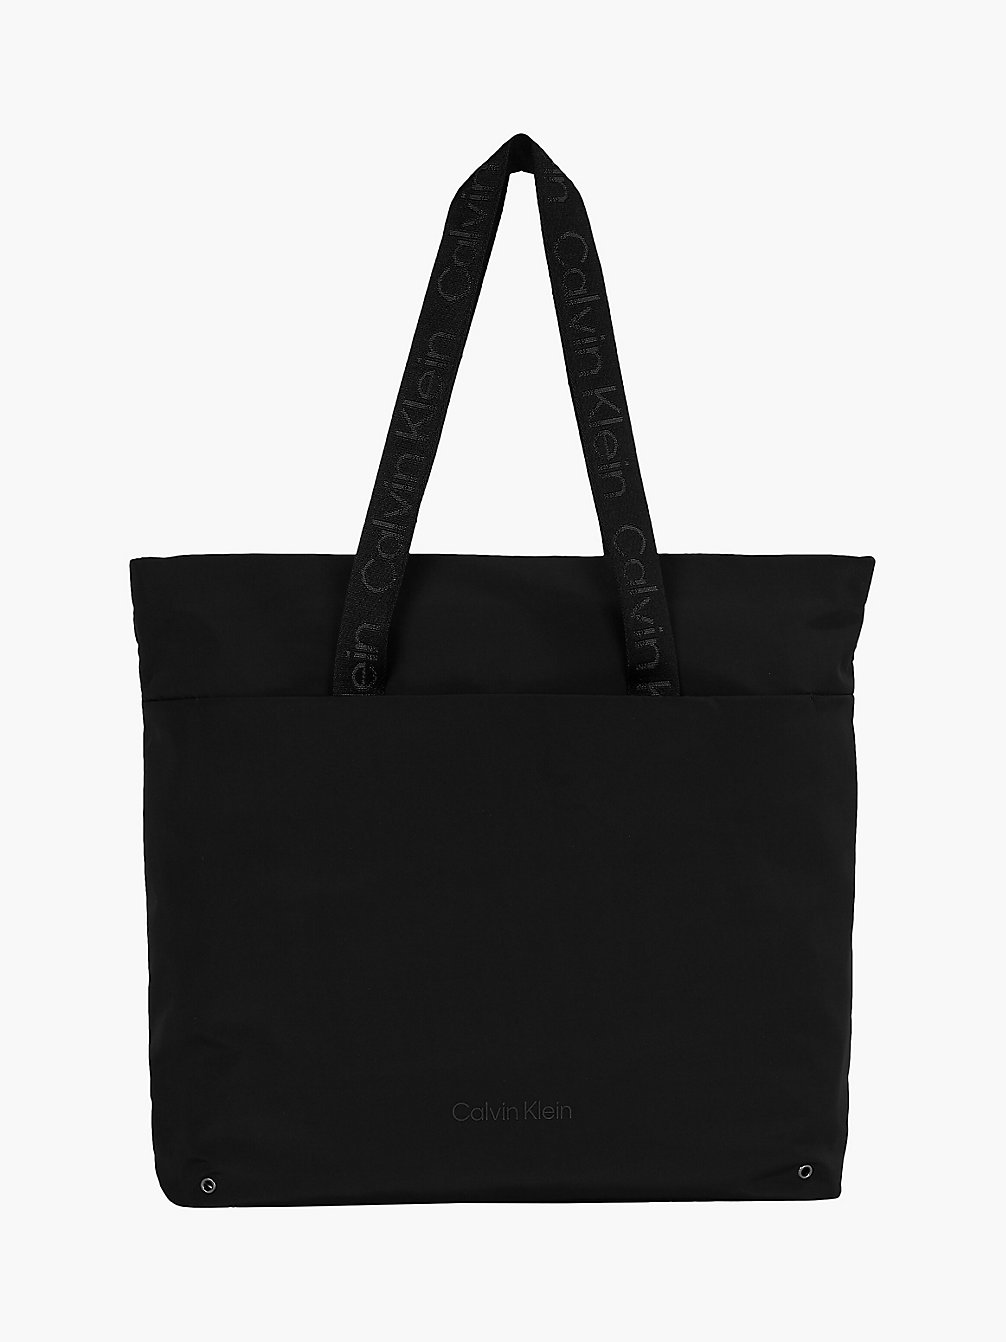 CK BLACK Recycled Polyester Tote Bag undefined unisex Calvin Klein